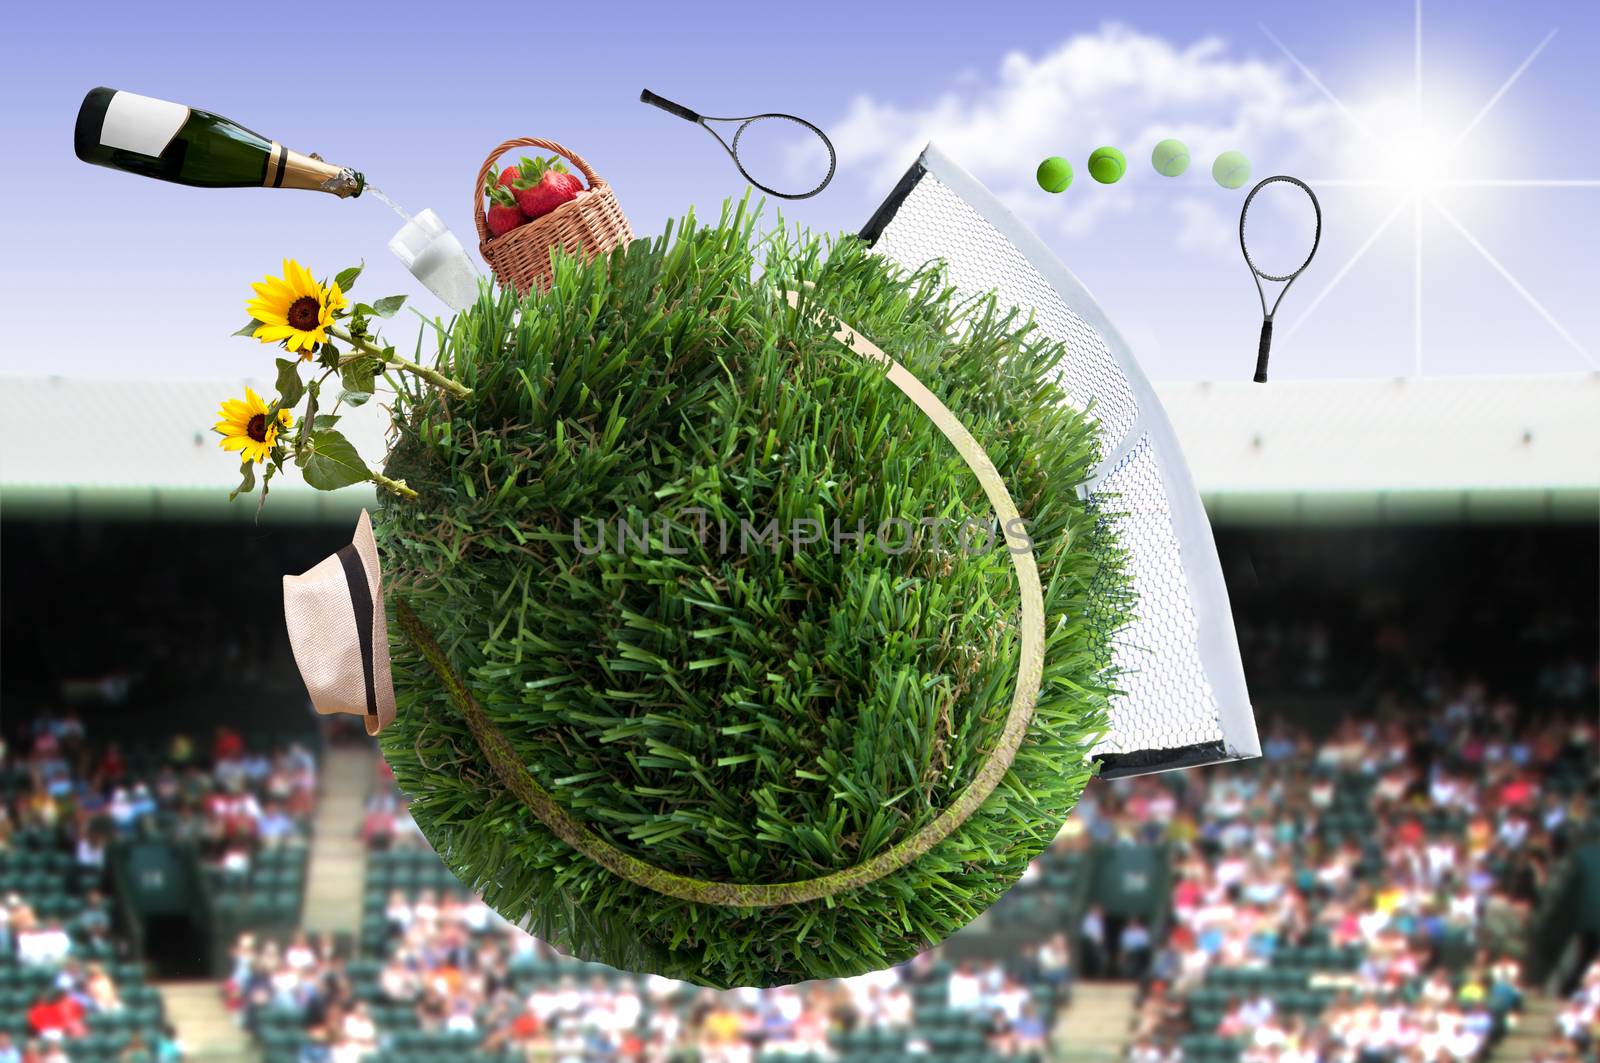 Tennis ball made from grass with net and game, and crowds in the background